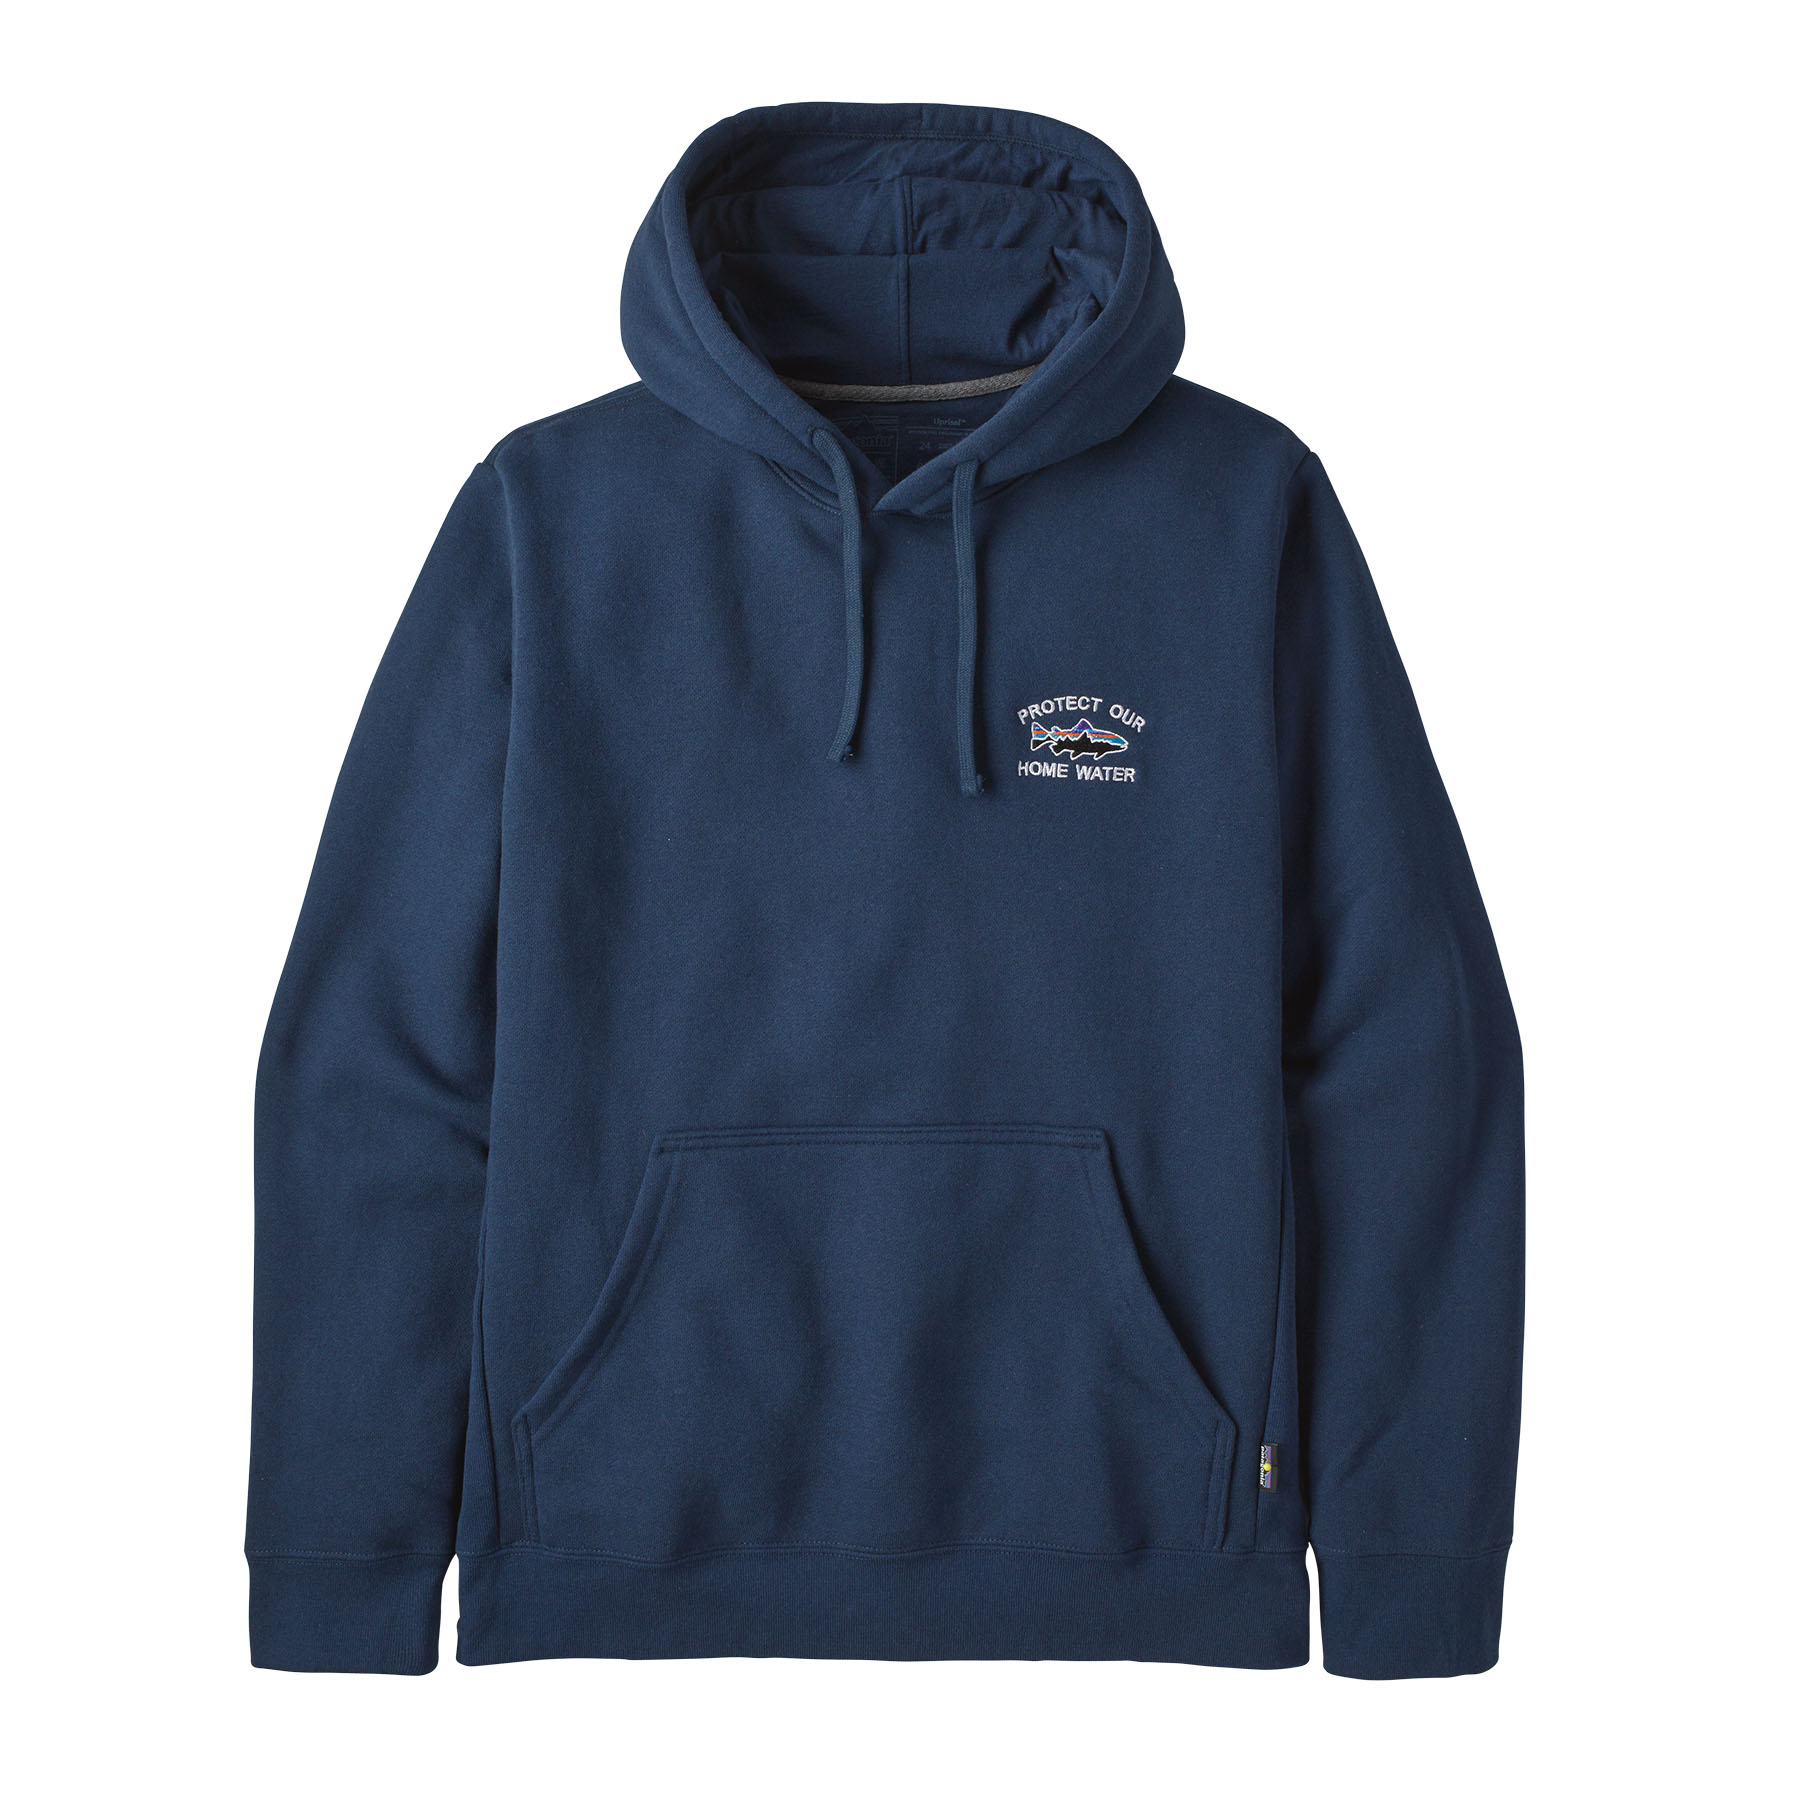 Home Water Trout Uprisal Hoody (lagom blue)